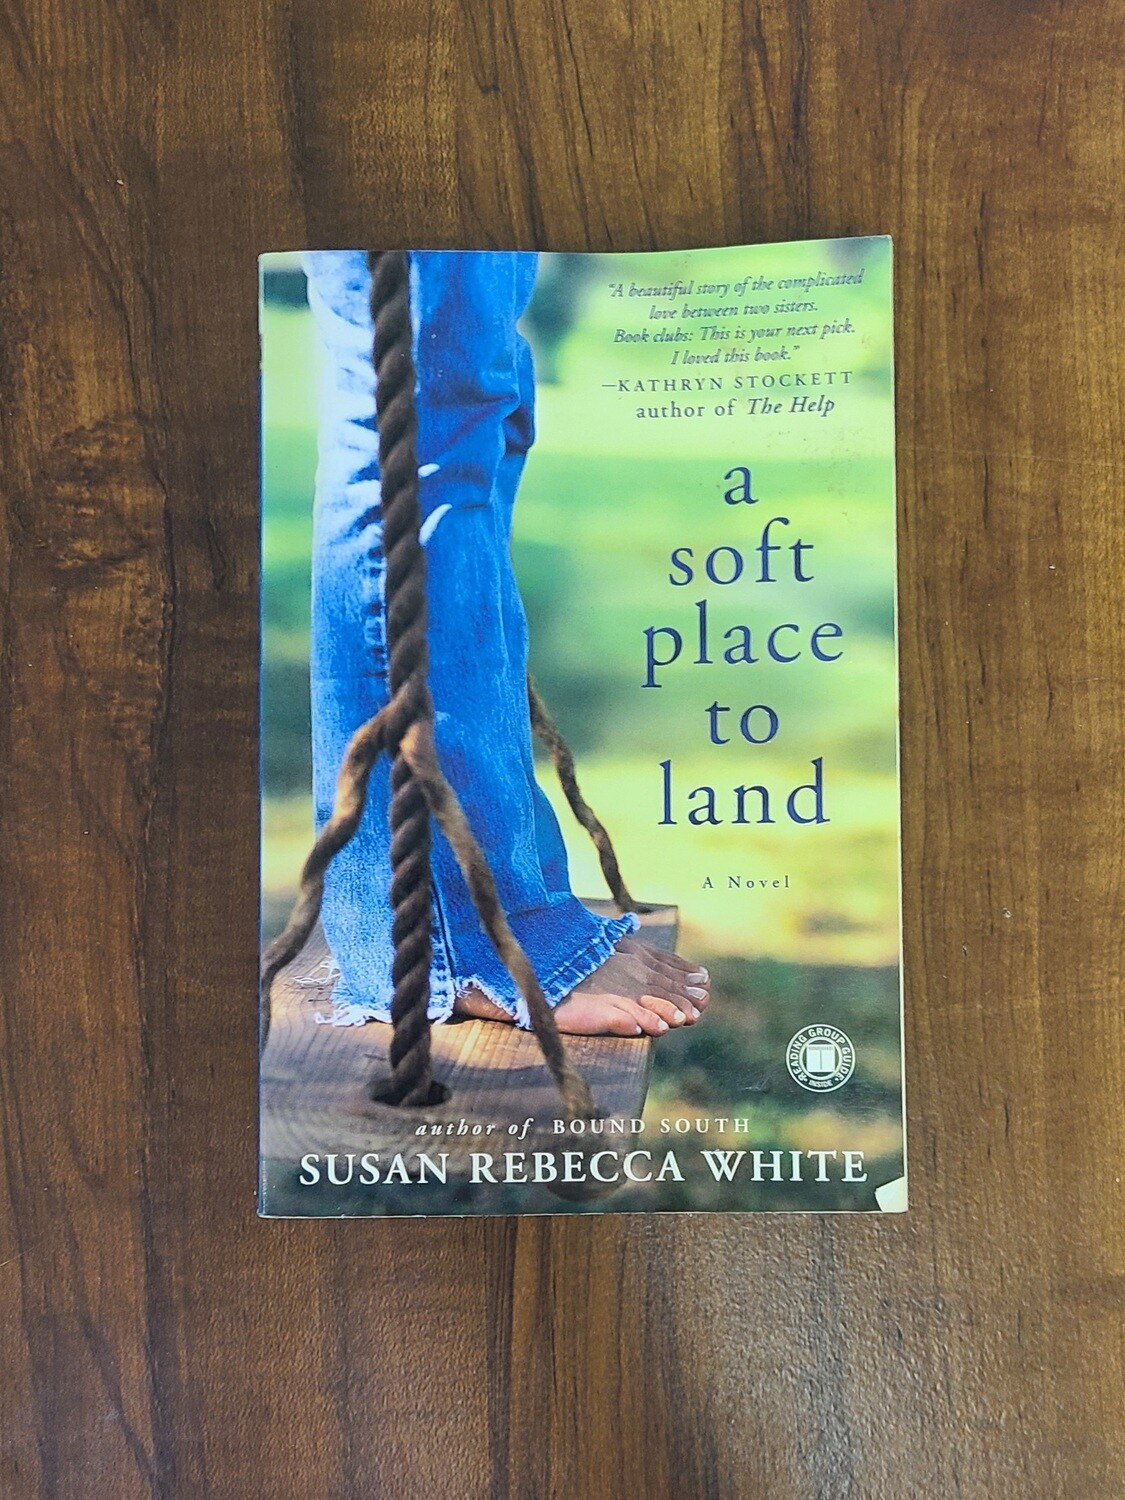 A Soft Place To Land by Susan Rebecca White